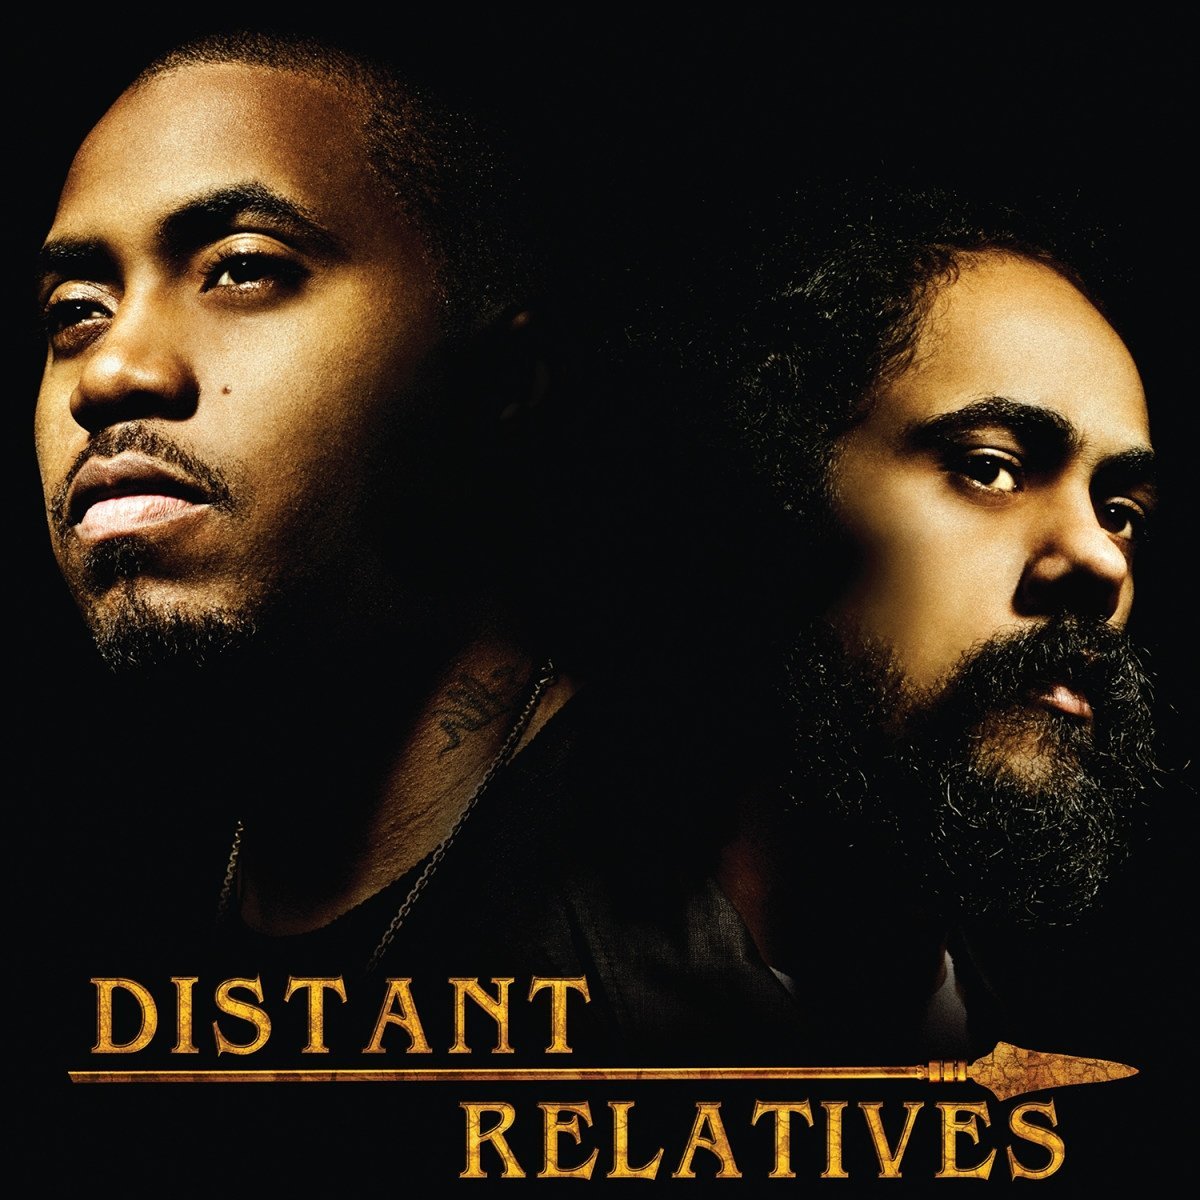 Today in Hip Hop History:
Nas and Damian Marley released the album Distant Relatives May 18, 2010